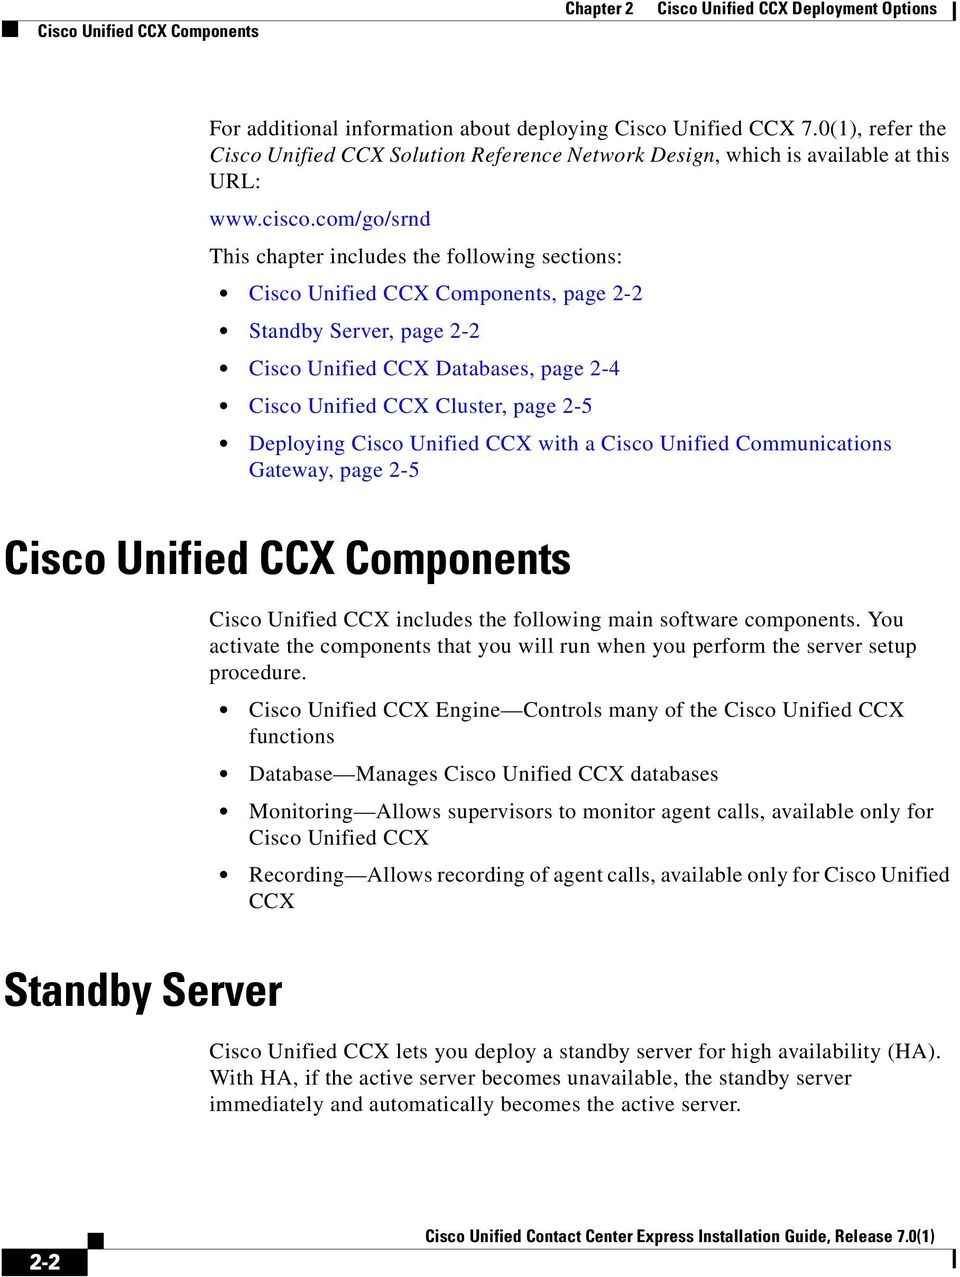 com/go/srnd This chapter includes the following sections: Cisco Unified CCX Components, page 2-2 Standby Server, page 2-2 Cisco Unified CCX Databases, page 2-4 Cisco Unified CCX Cluster, page 2-5